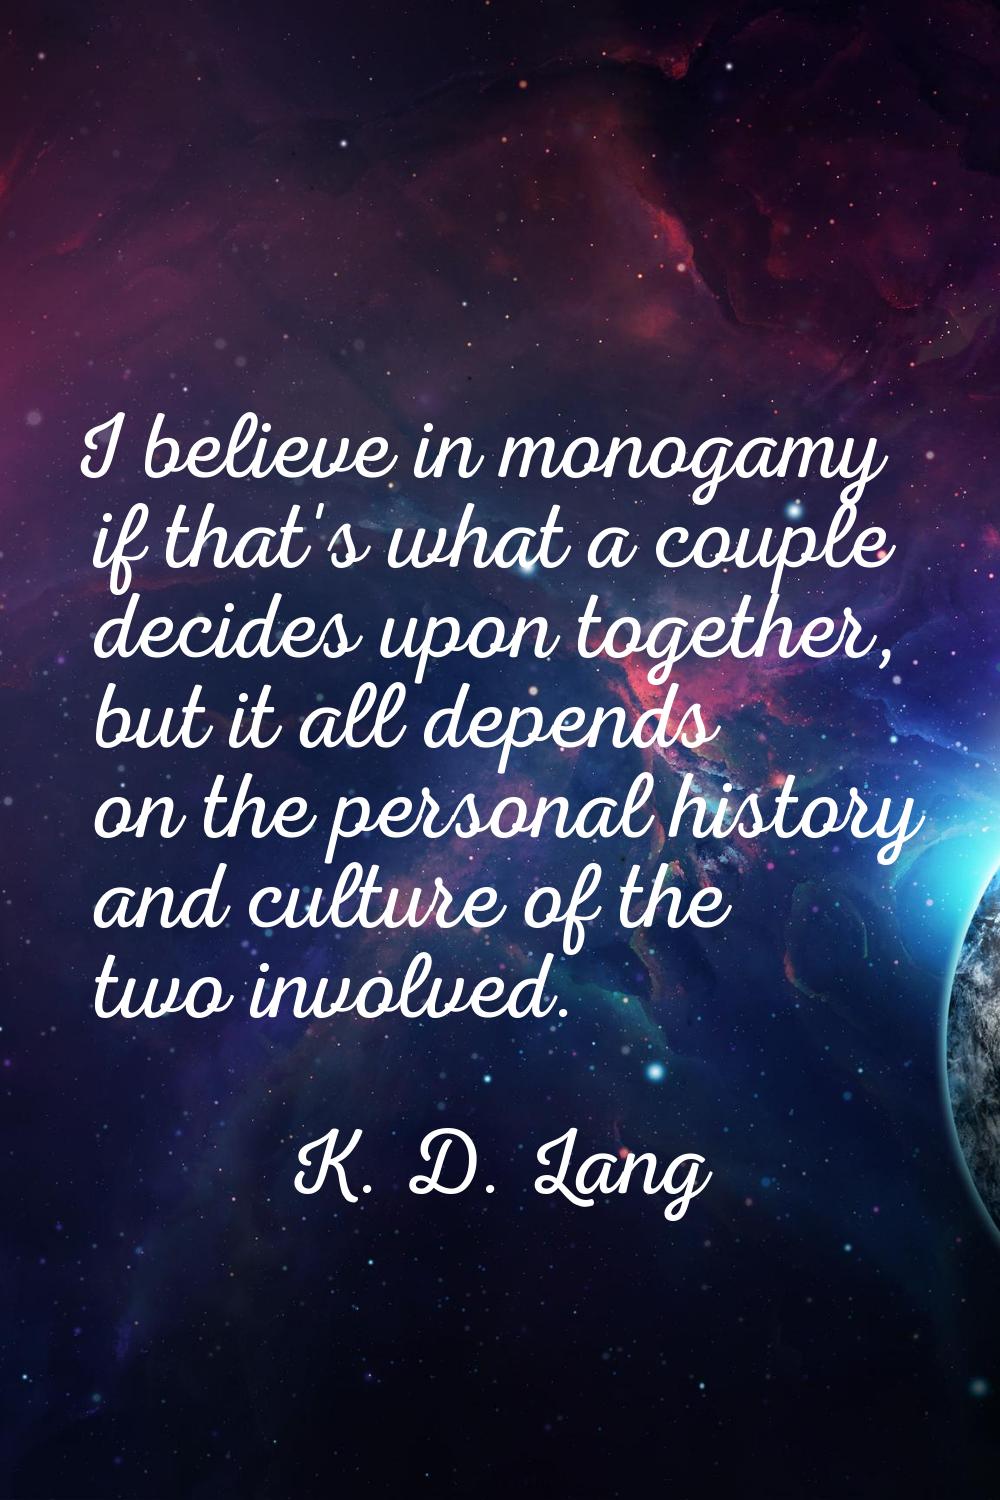 I believe in monogamy if that's what a couple decides upon together, but it all depends on the pers